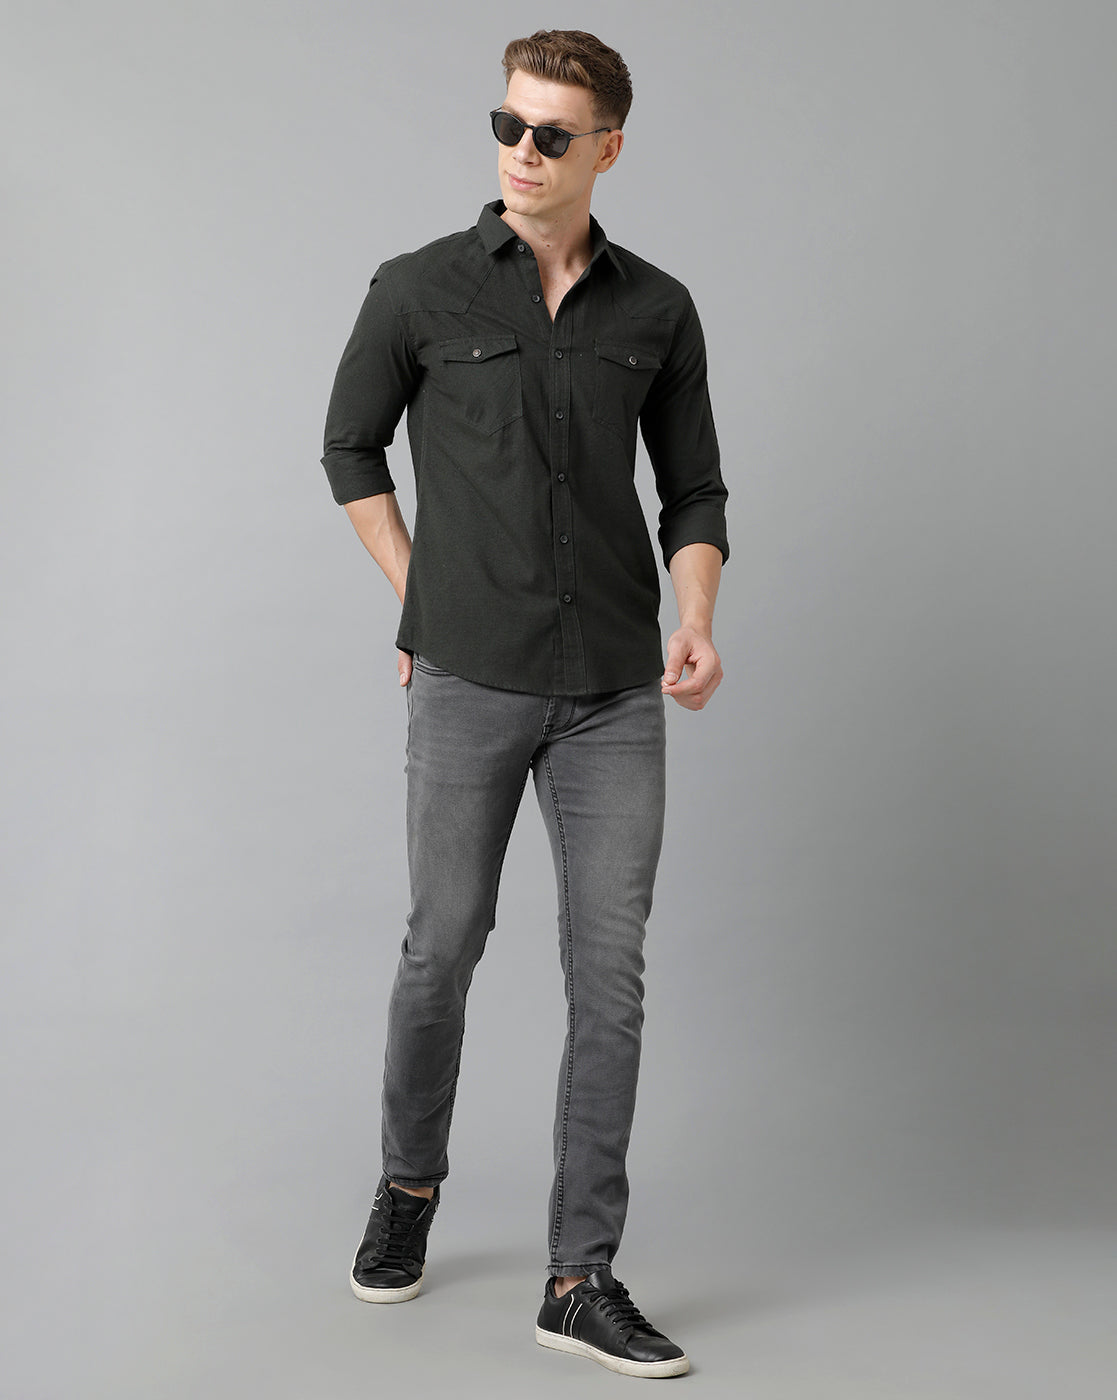 Olive green double pocket shirt